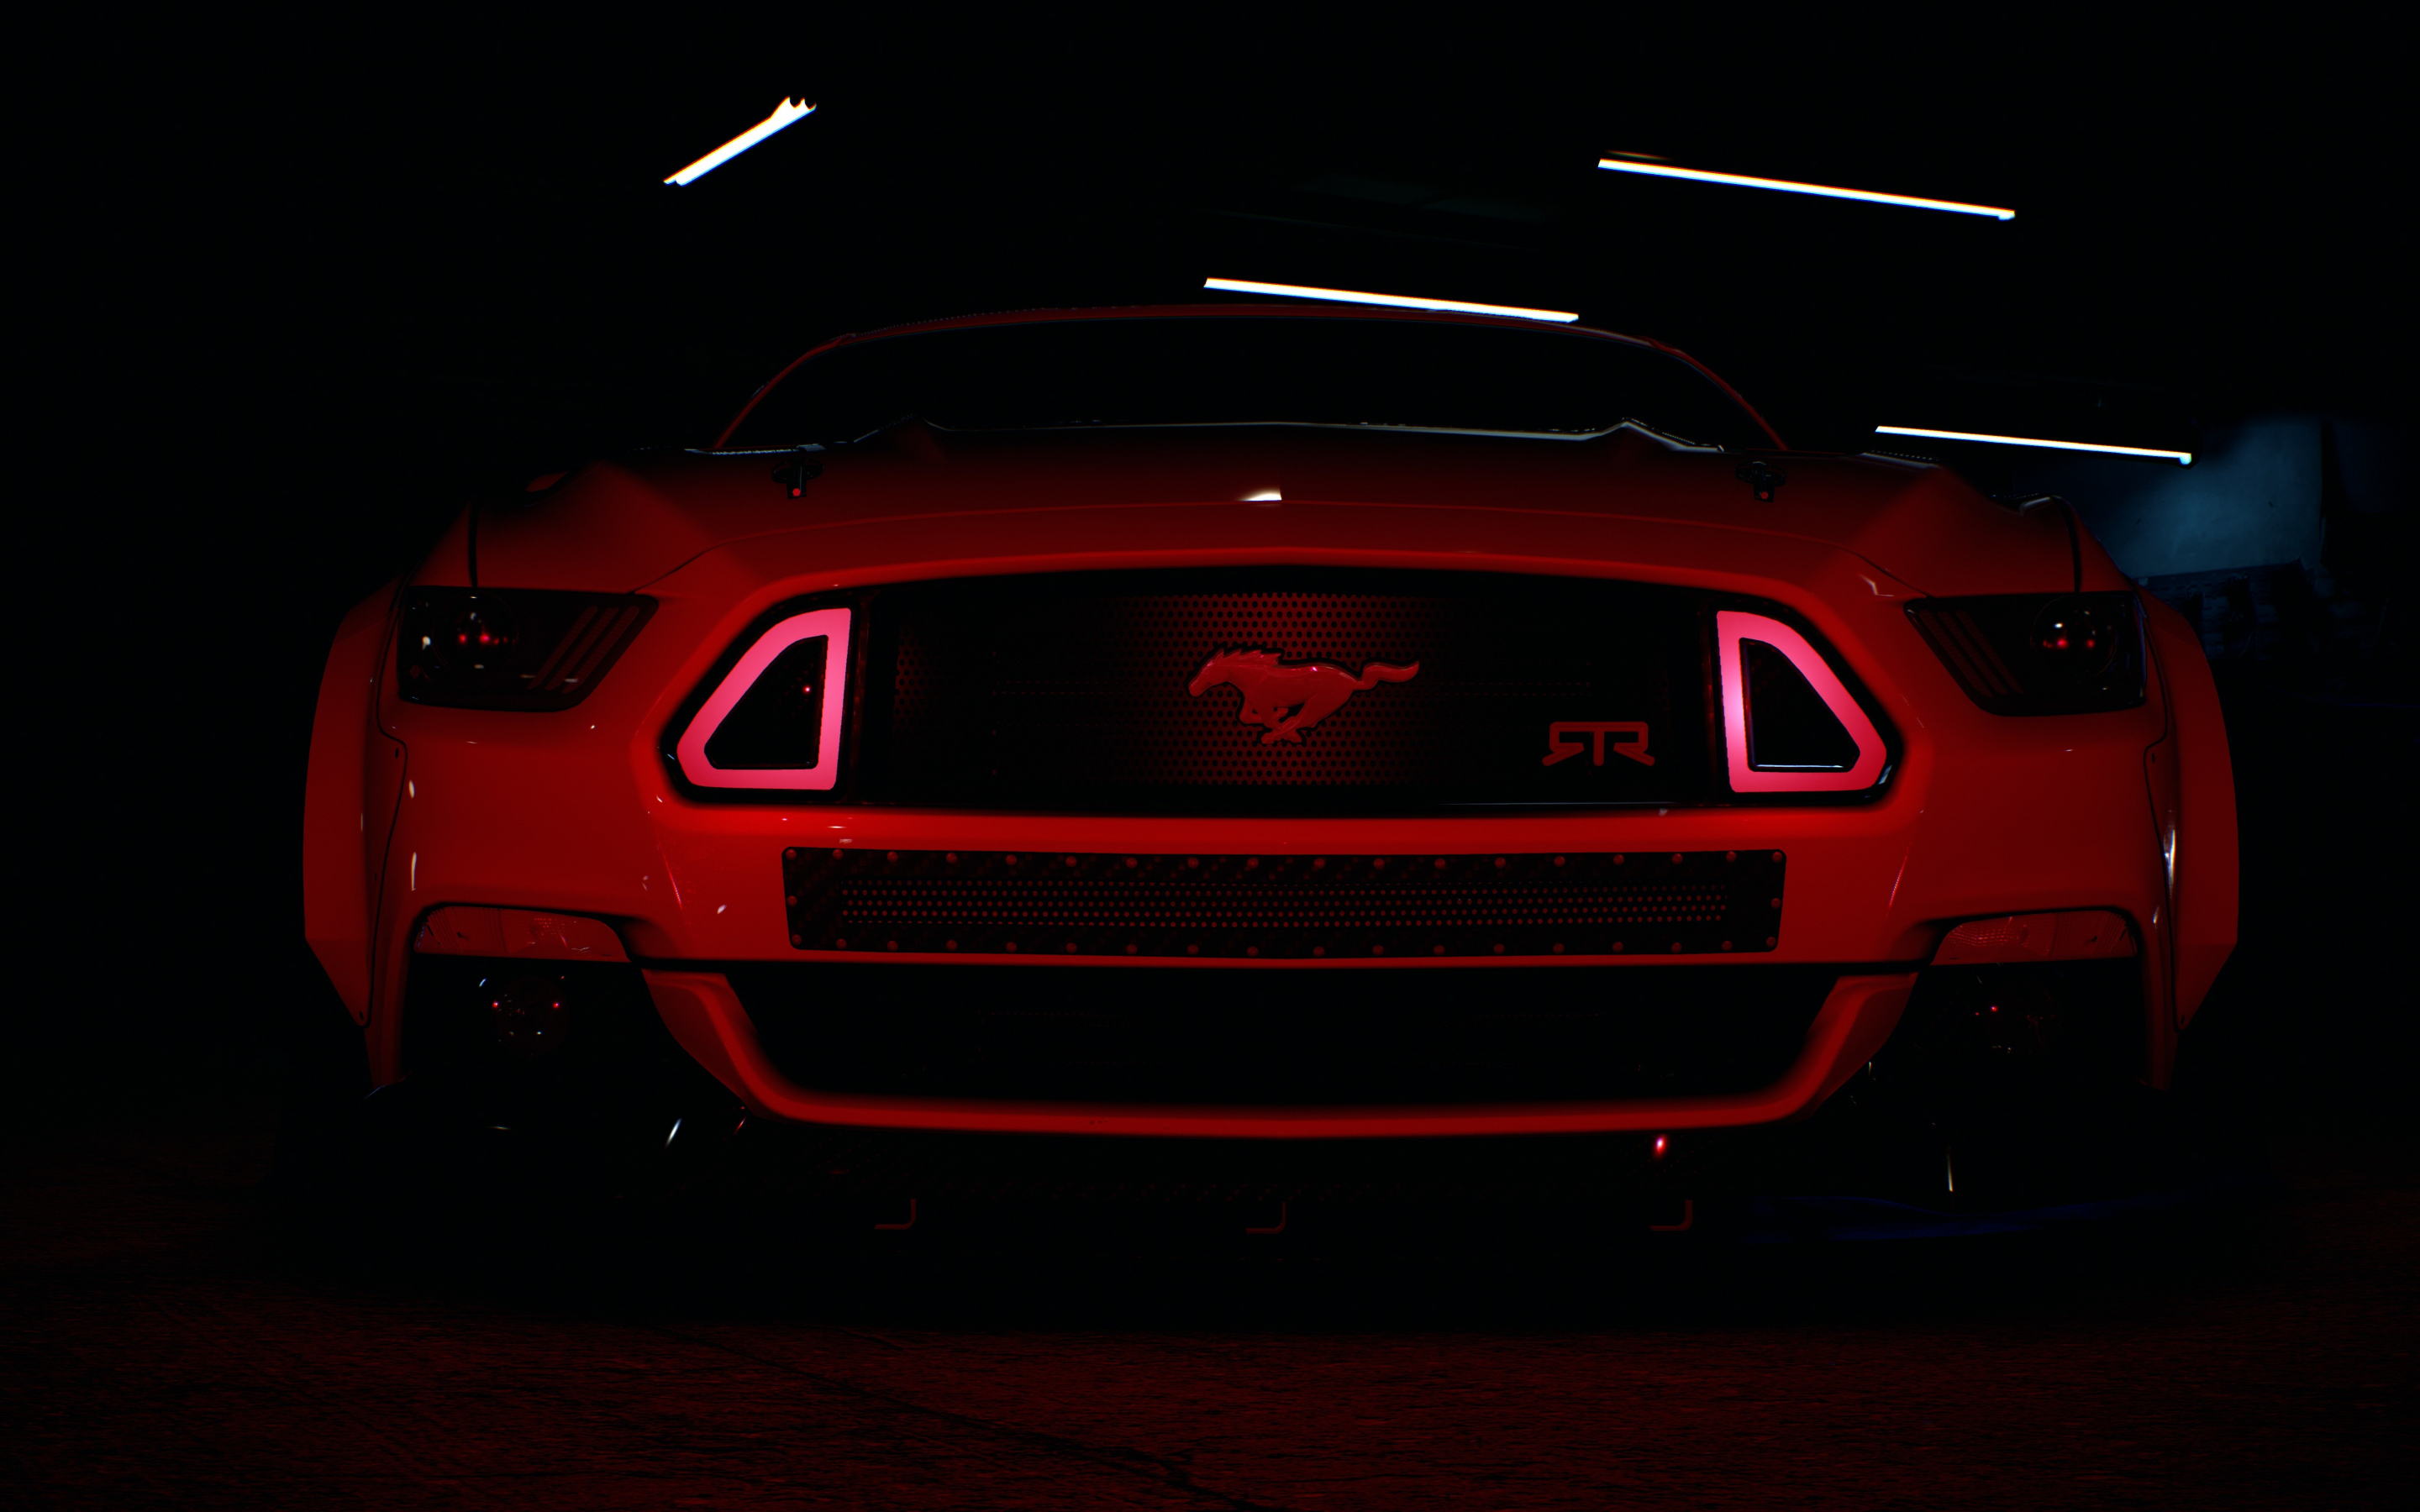 Headlight, Need for speed, ford mustang, 2880x1800 wallpaper